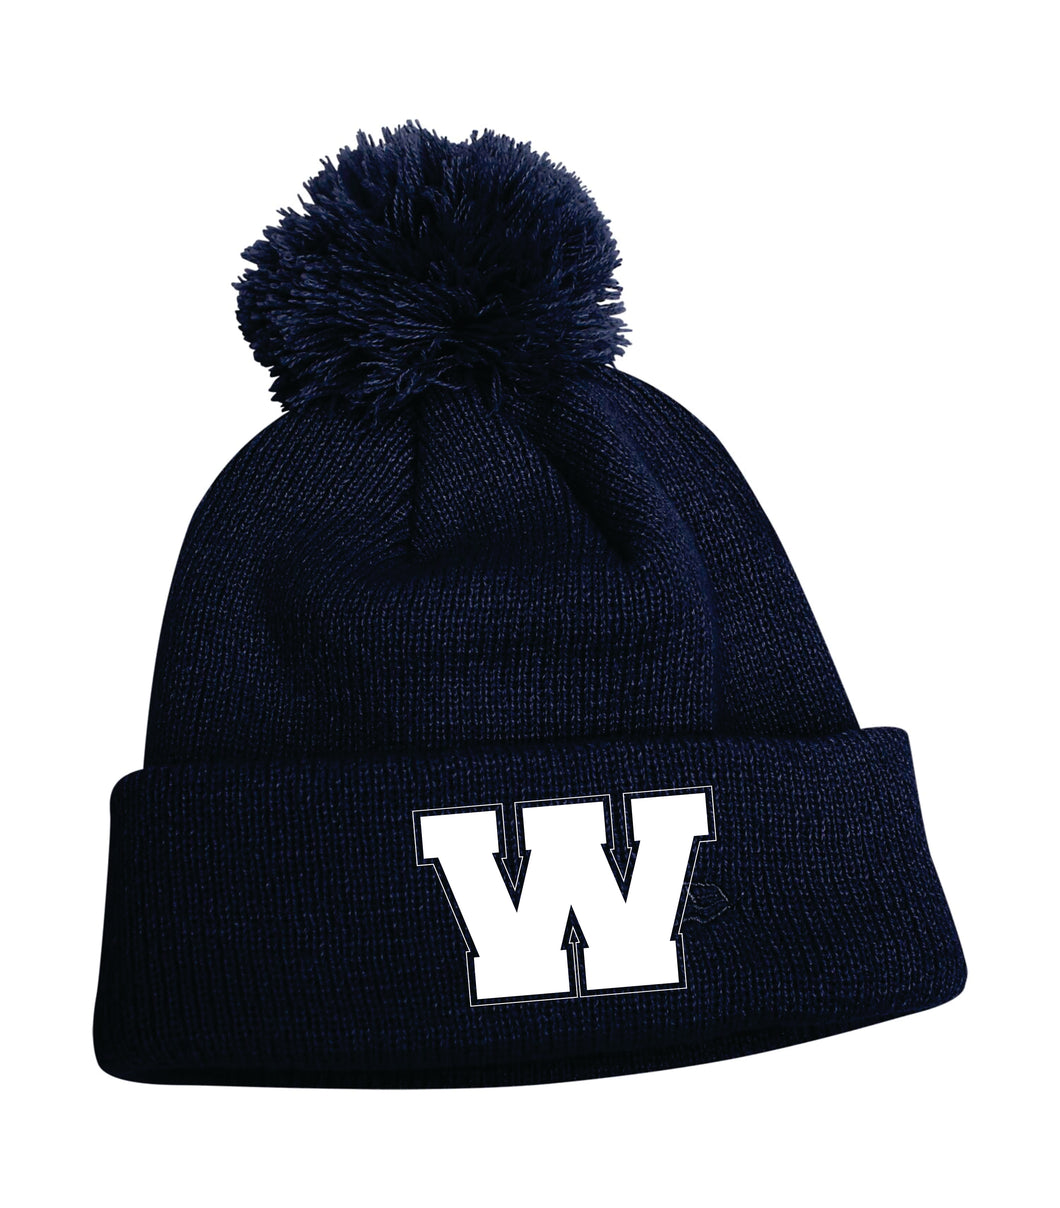 NAVY TOQUES - WALSHE W LOGO